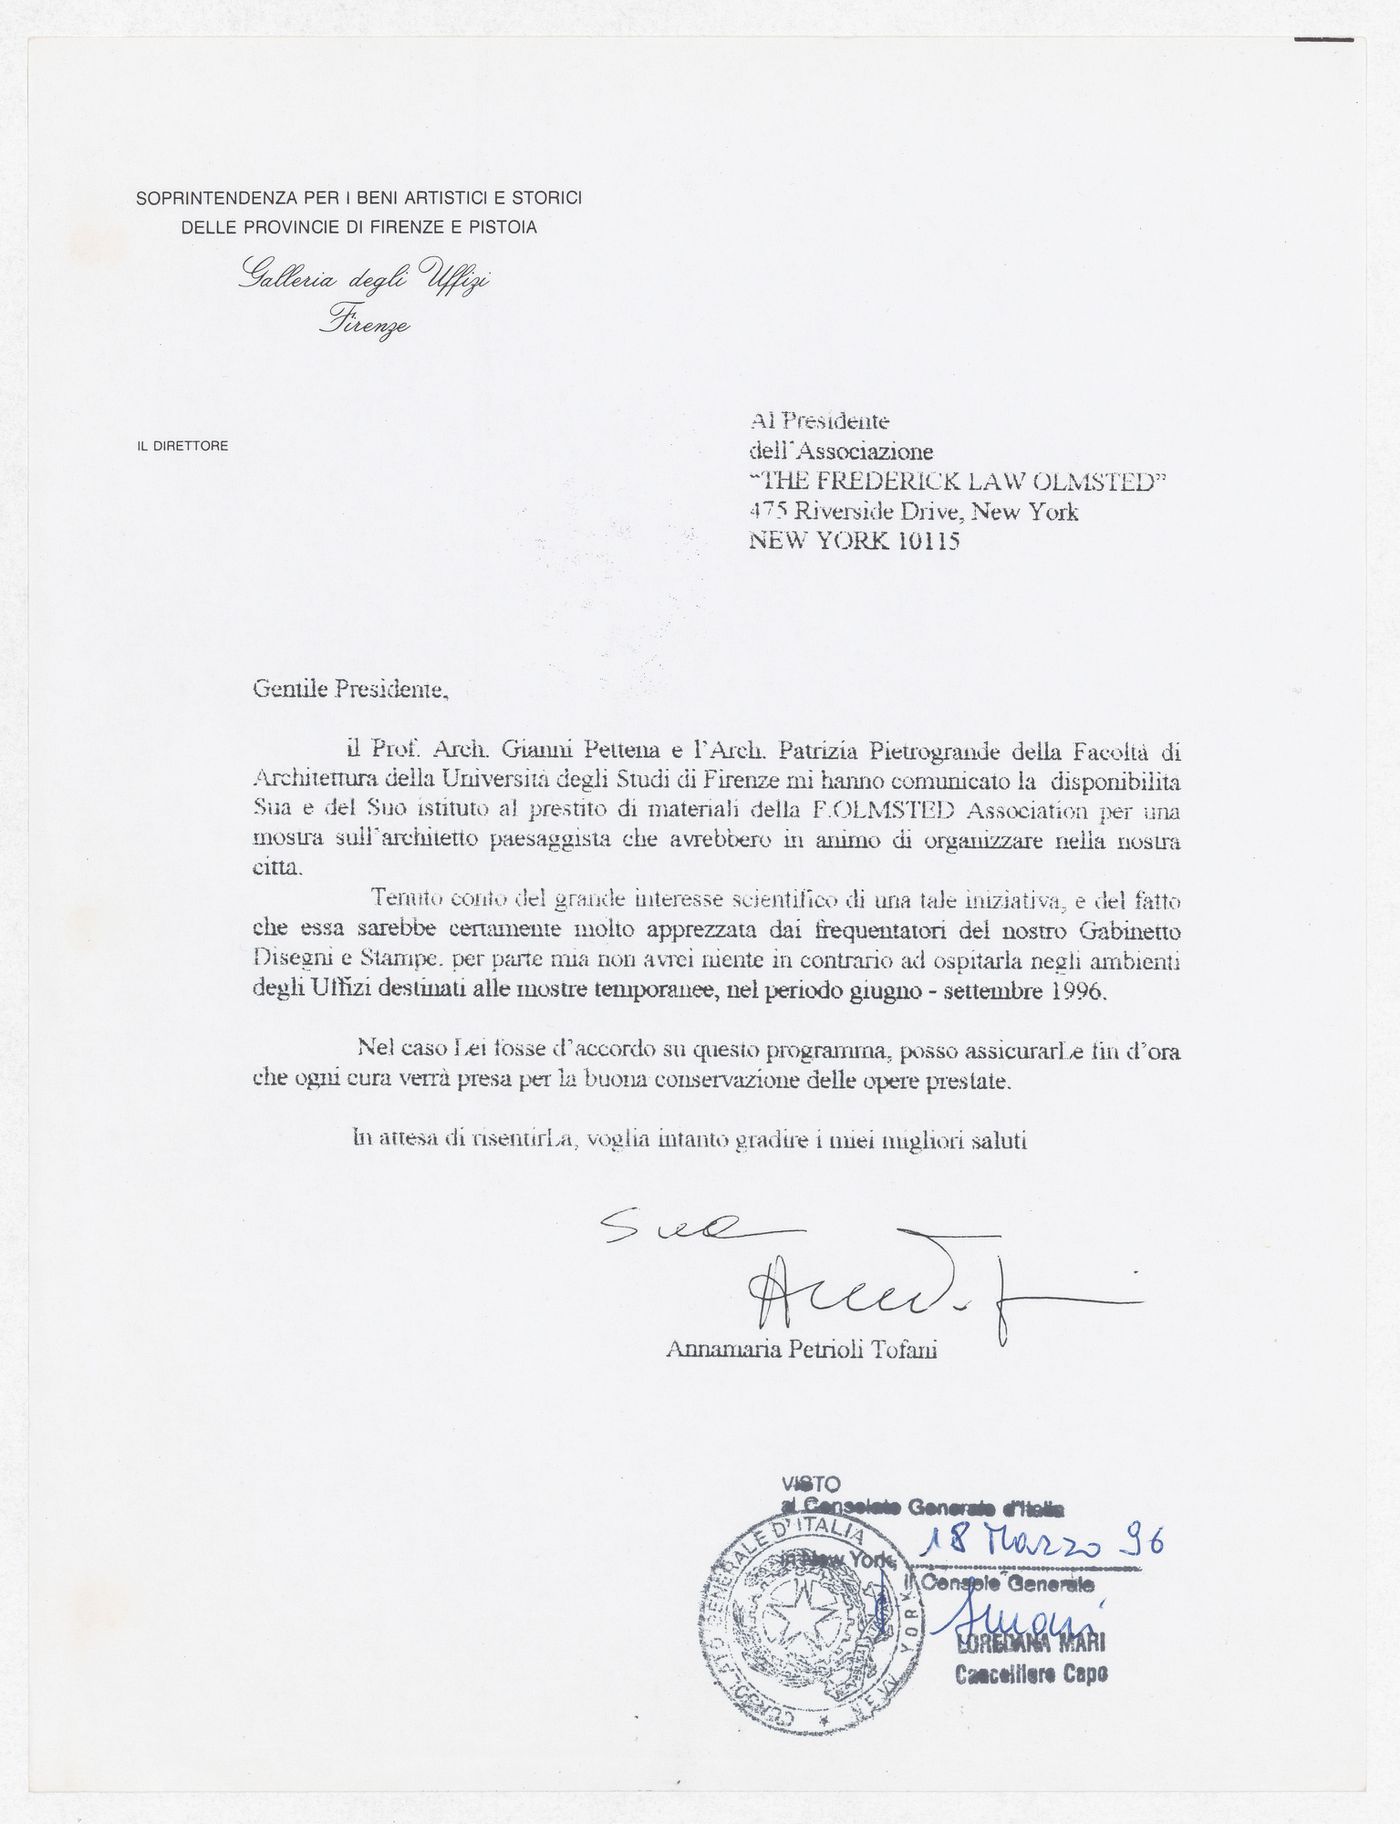 Correspondence from Annamaria Petroli Tofani to the President of the Frederick Law Olmsted Association for the exhibition Olmsted: L'origine del parco urbano e del parco naturale contemporaneo